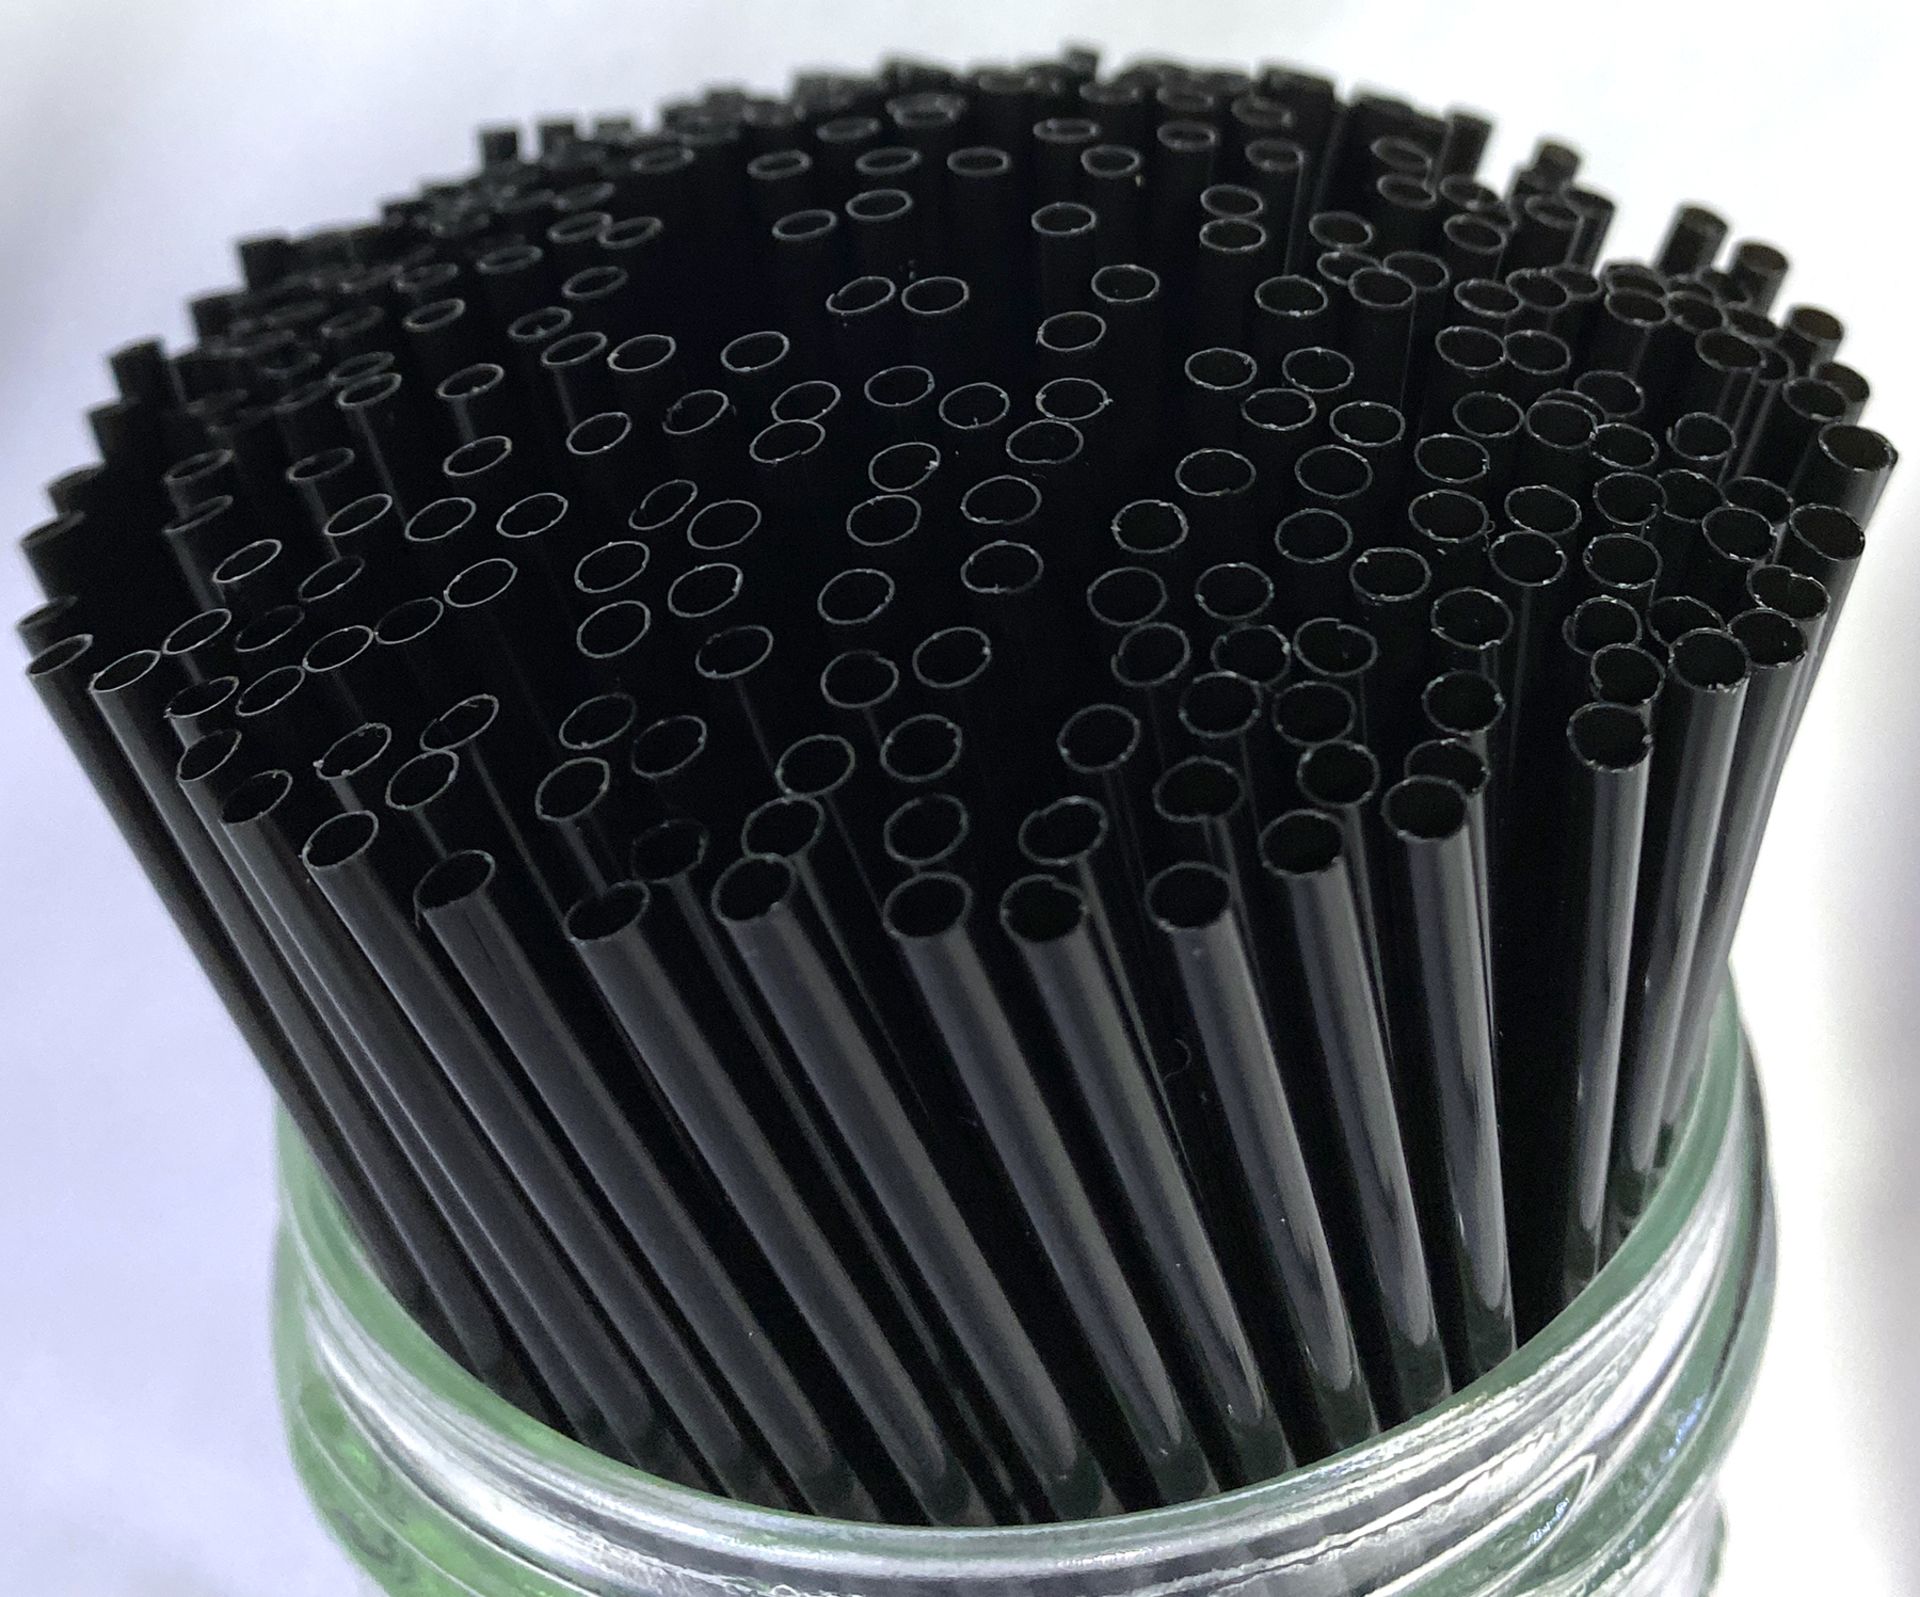 5 x Boxes of Black Sip Straws by 888 Gastro Disposables - Image 3 of 3